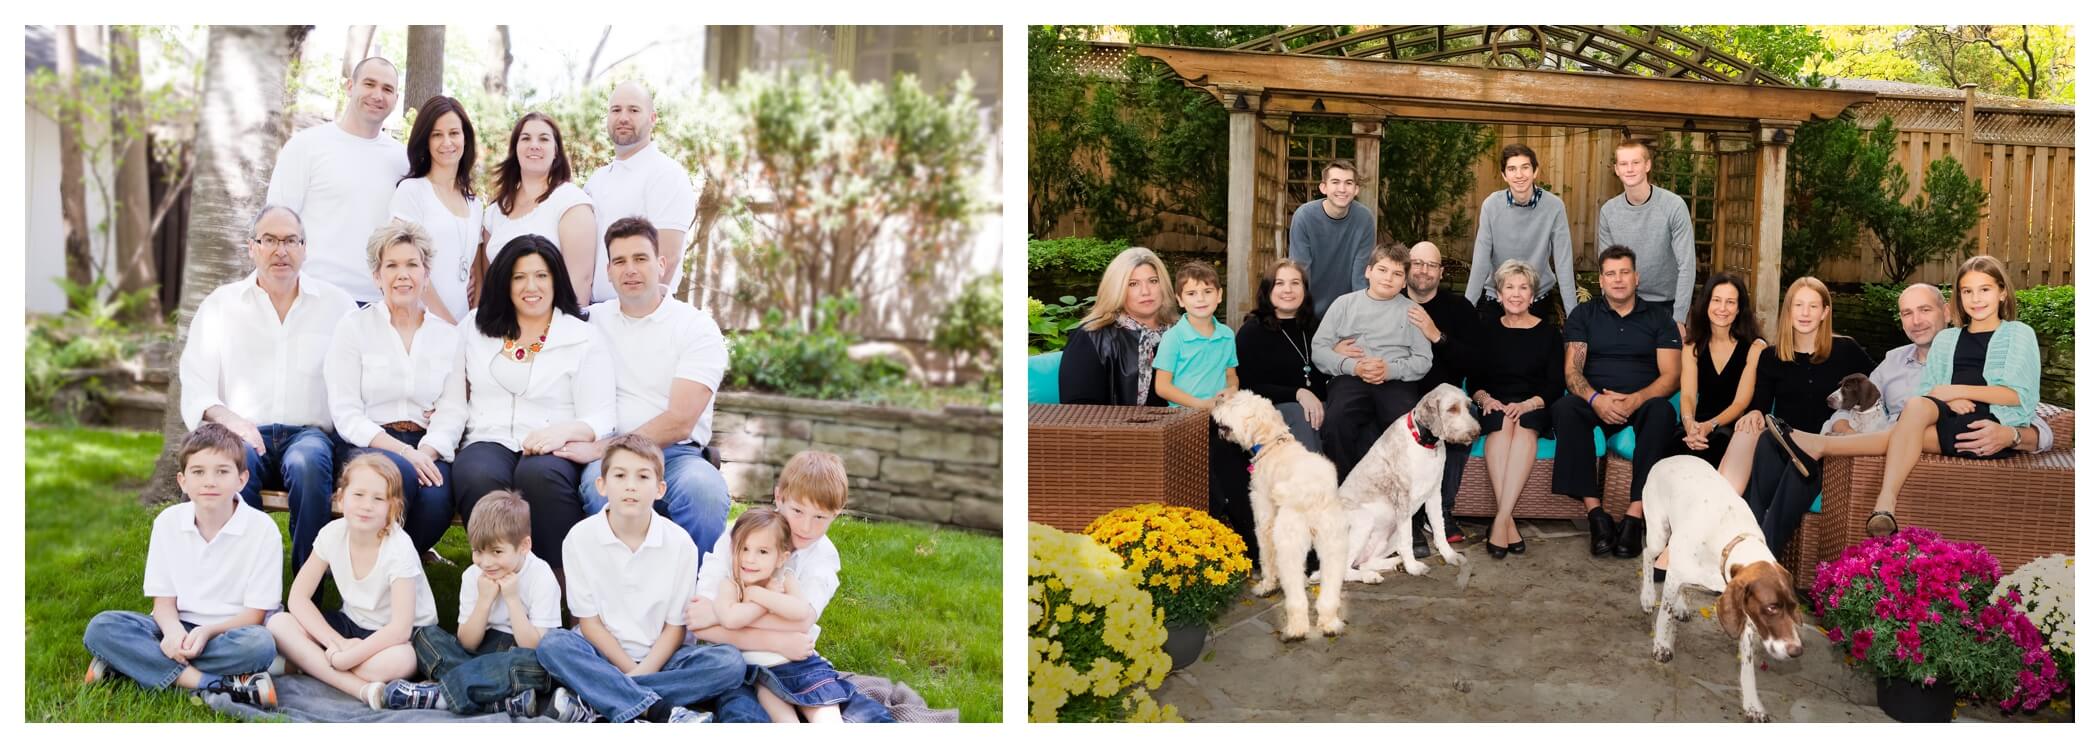 extended family photos ten years apart